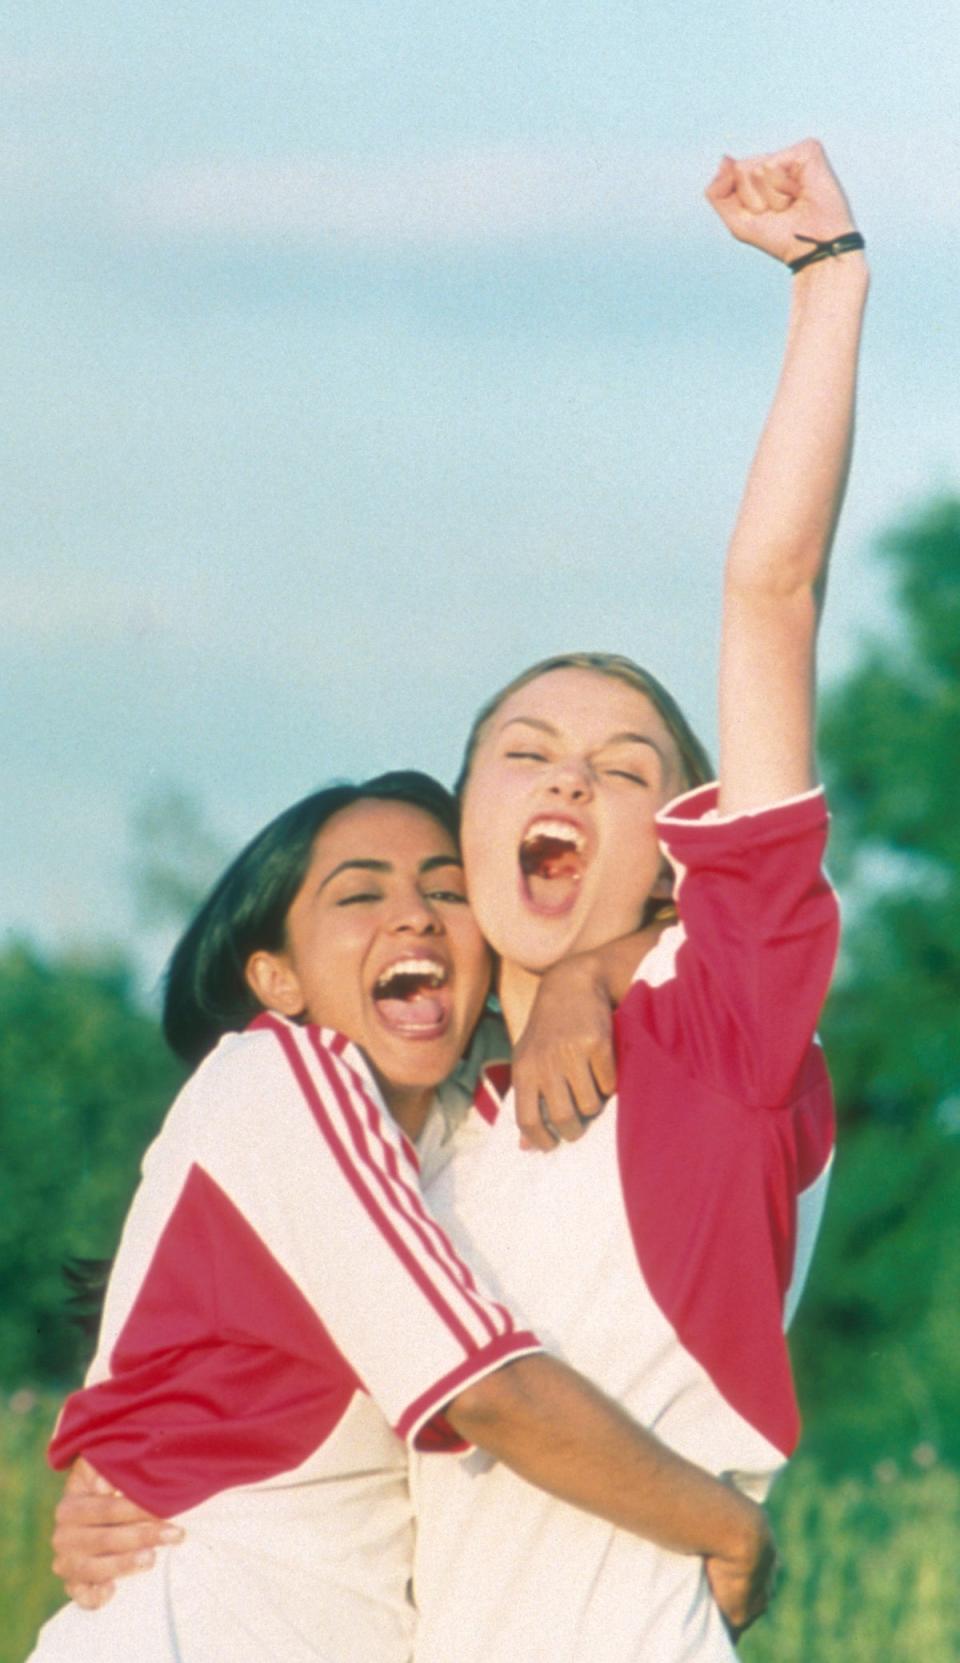 Parminder Nagra and Keira Knightley in ‘Bend It Like Beckham' (Film Council/Lionsgate)